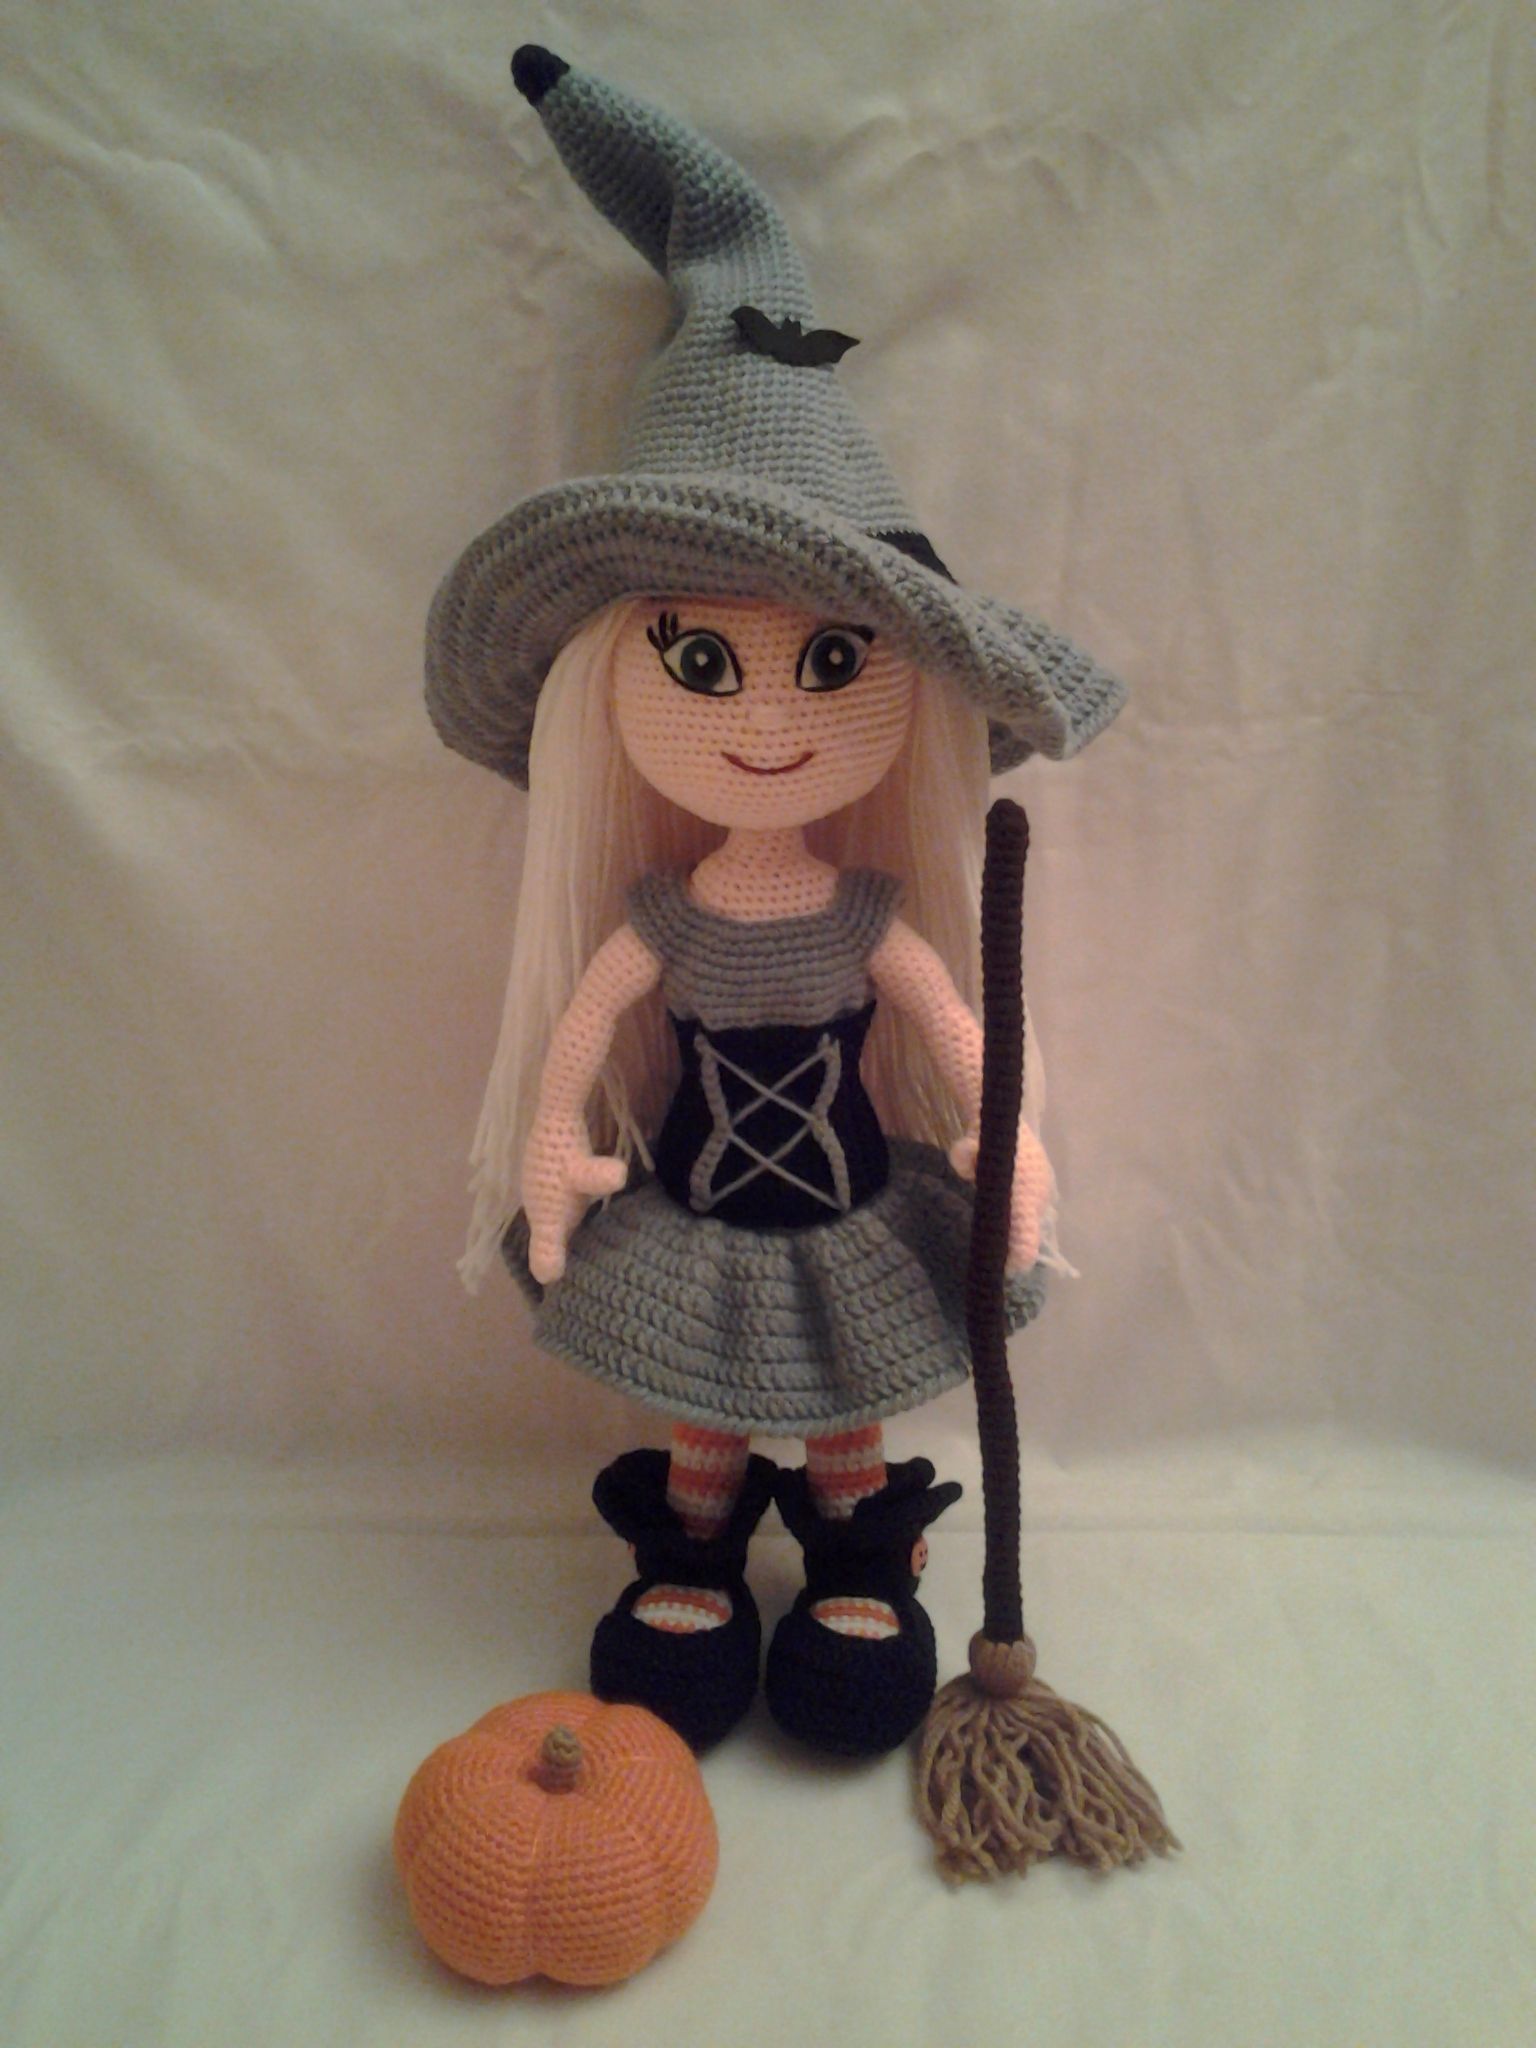 Wanda the Witch - Handmade by Toledo's Talents - Facebook.com ...